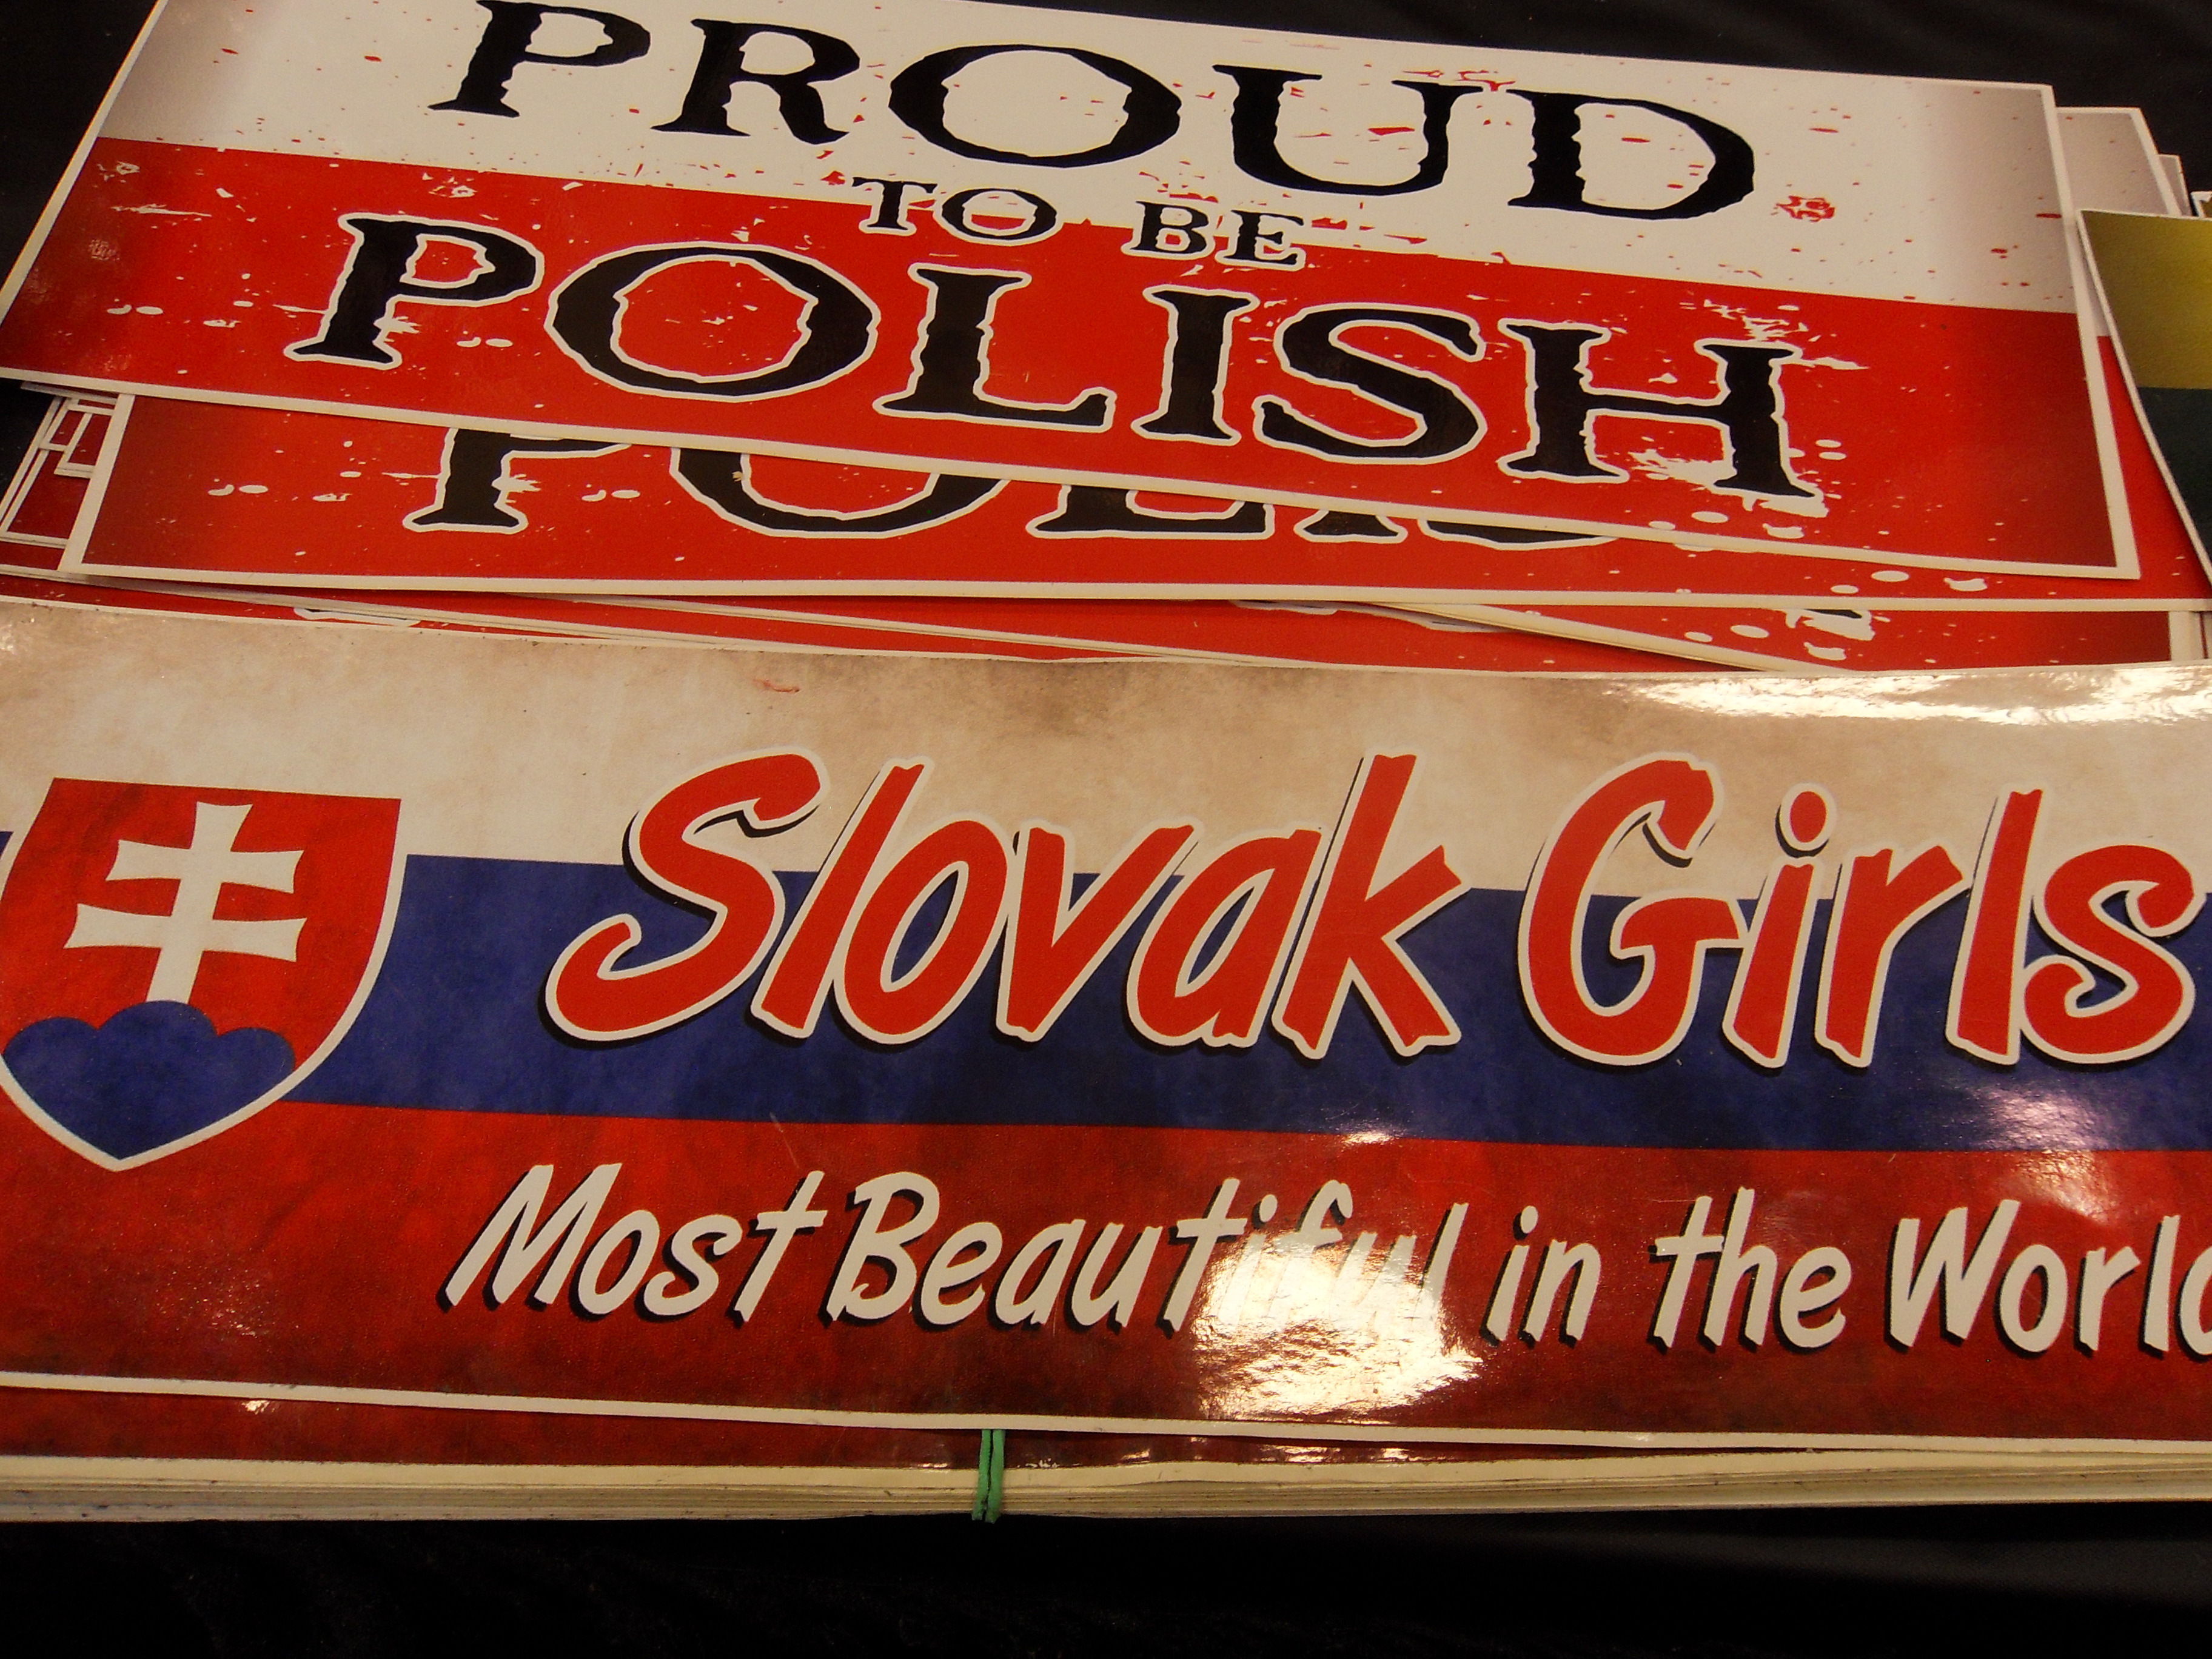 Proud to be Polish